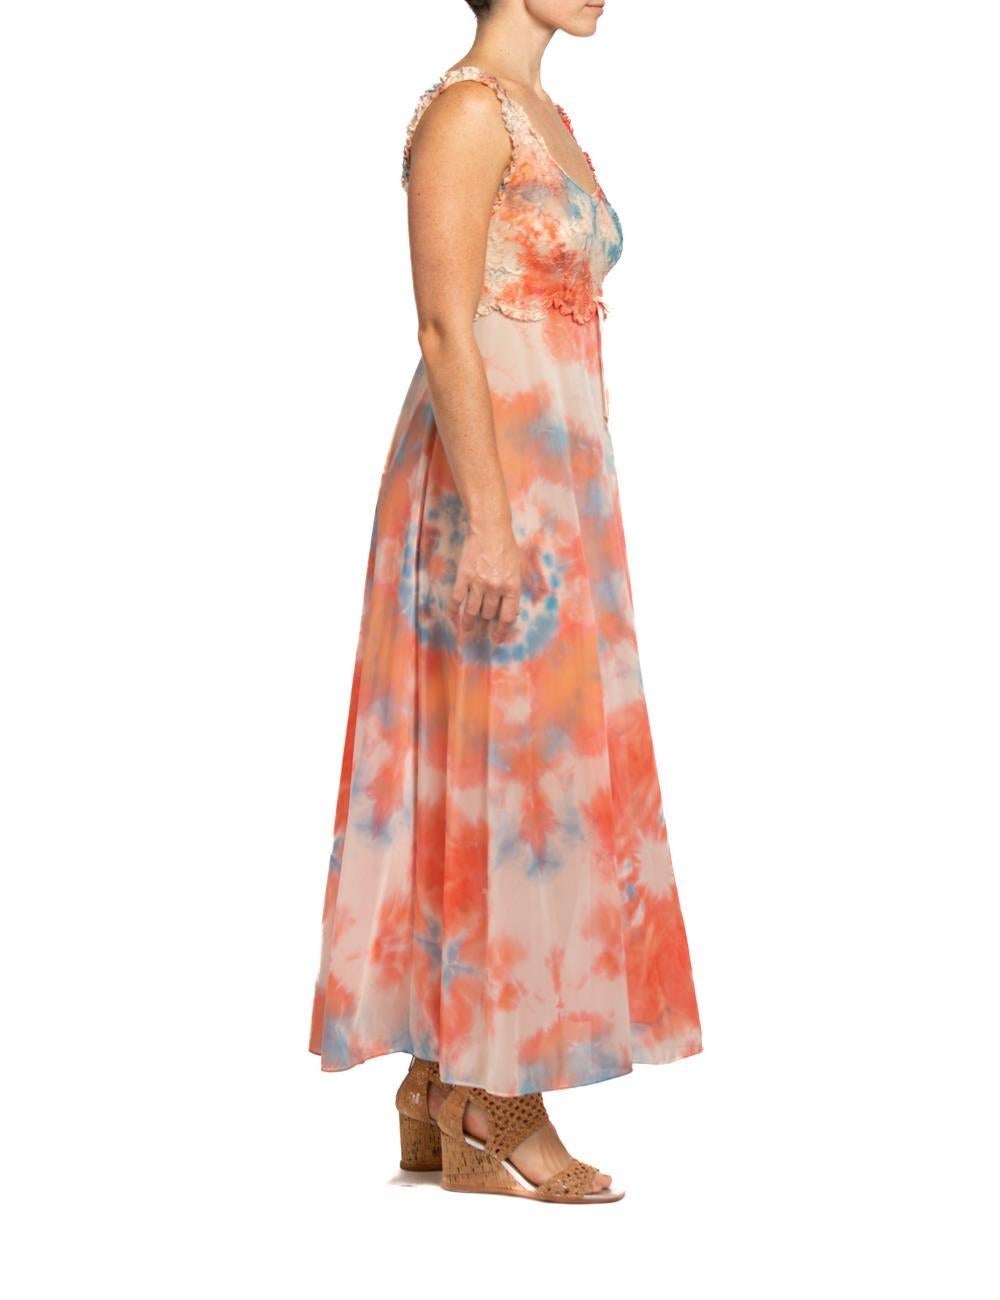 Women's 1970S Pink & Blue Poly/Nylon Tricot Jersey Tie-Dyed Negligee Slip Dress For Sale